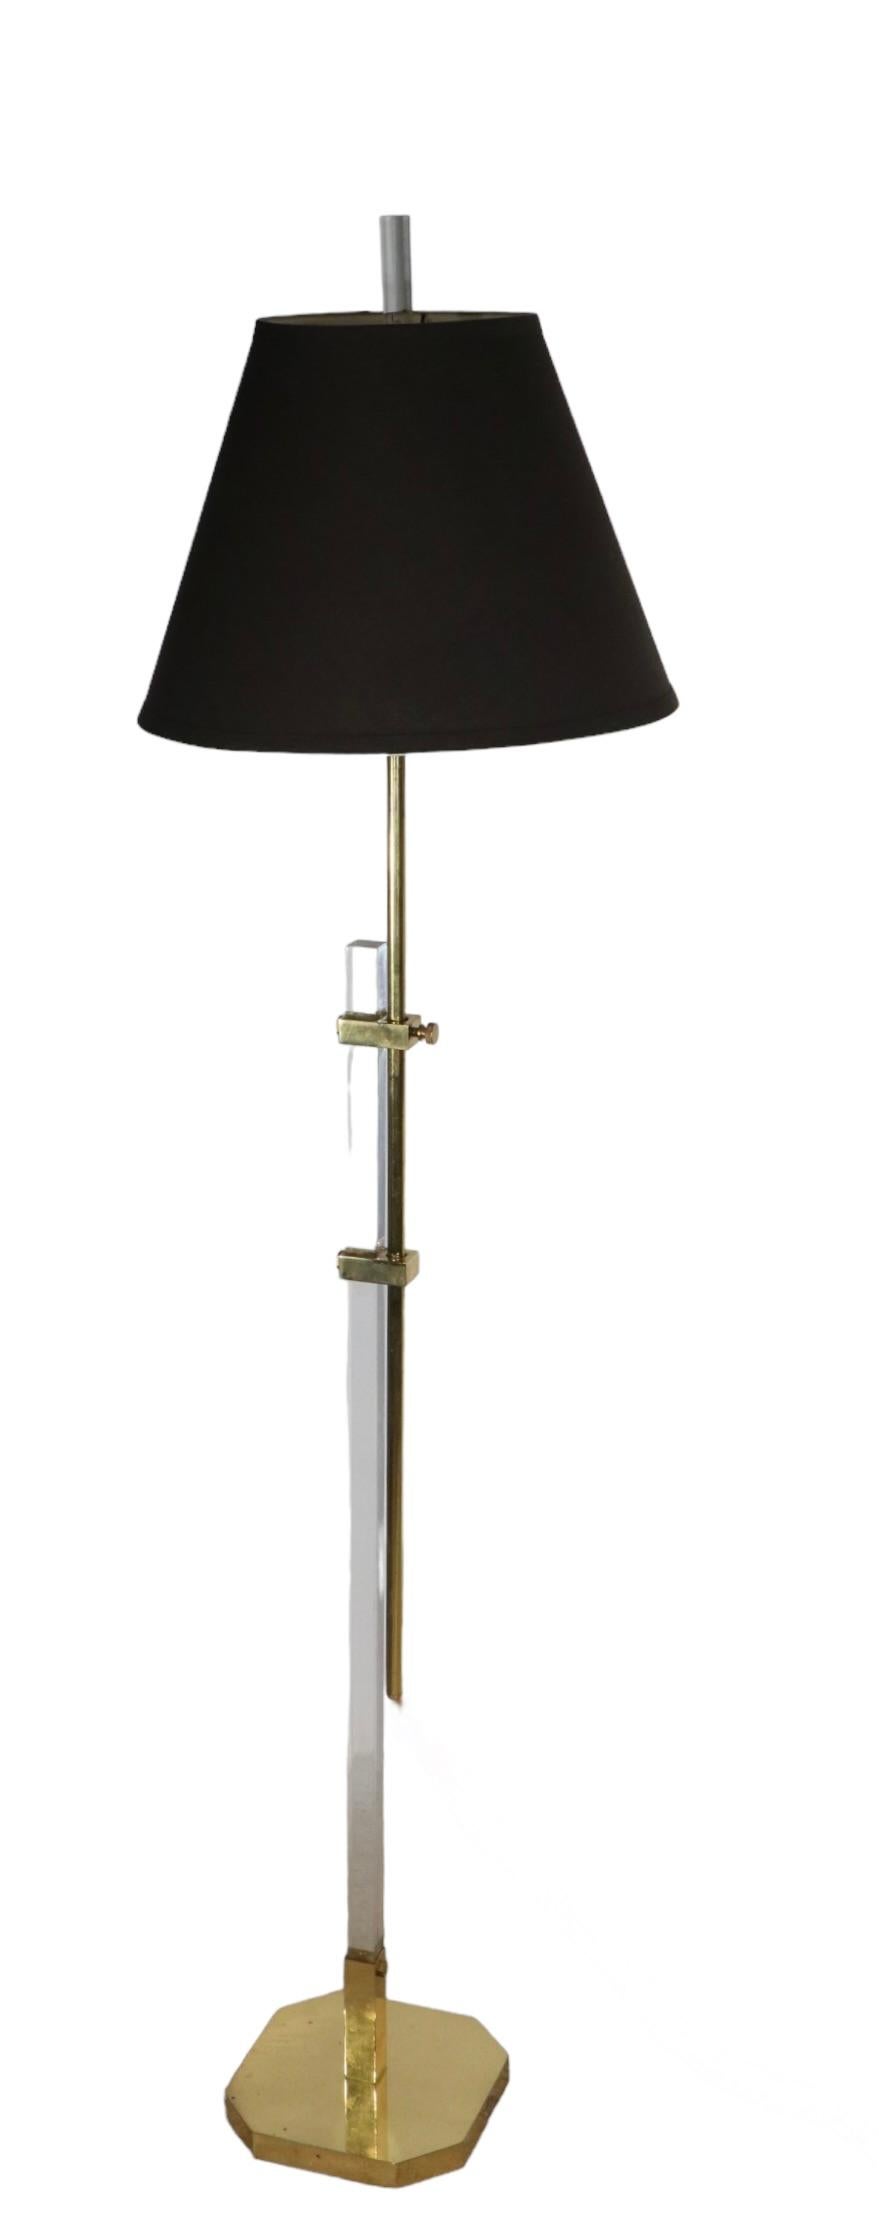  Adjustable Hollywood Regency Style Brass and Lucite Floor Lamp c. 1970/1980's For Sale 4